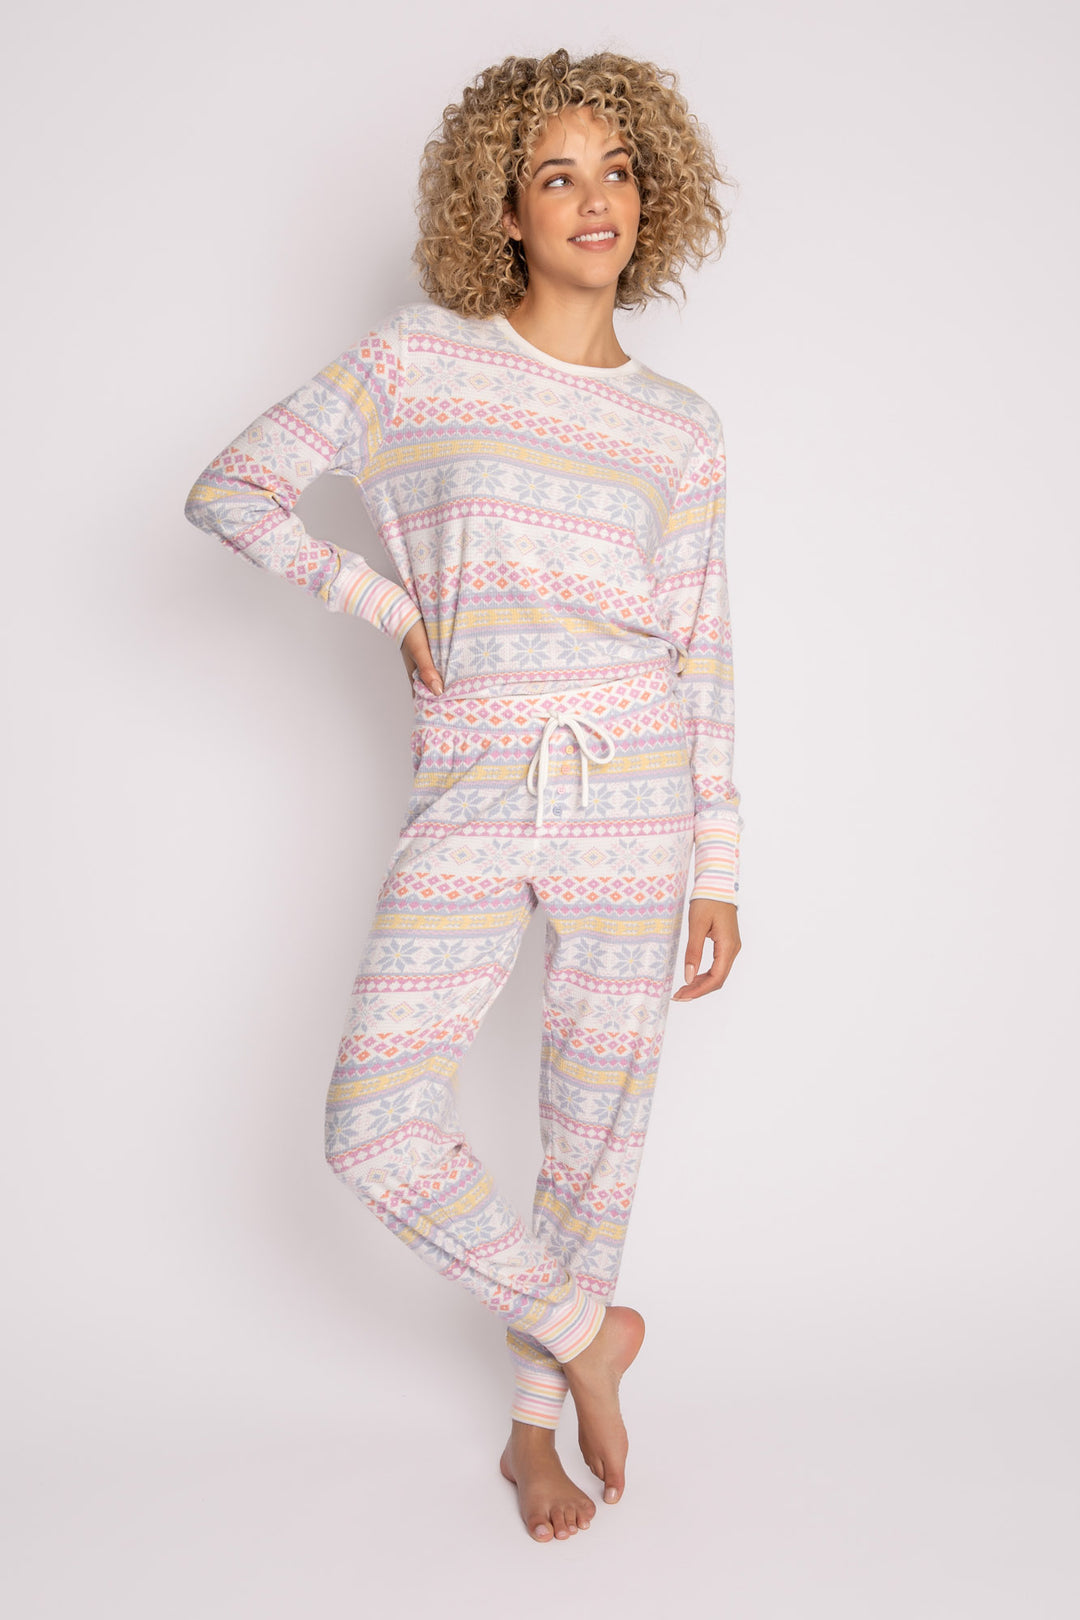 Velour pajama set in pastel fair isle winter pattern. Embroidered stitch neckline & colored buttons. (7231880822884)